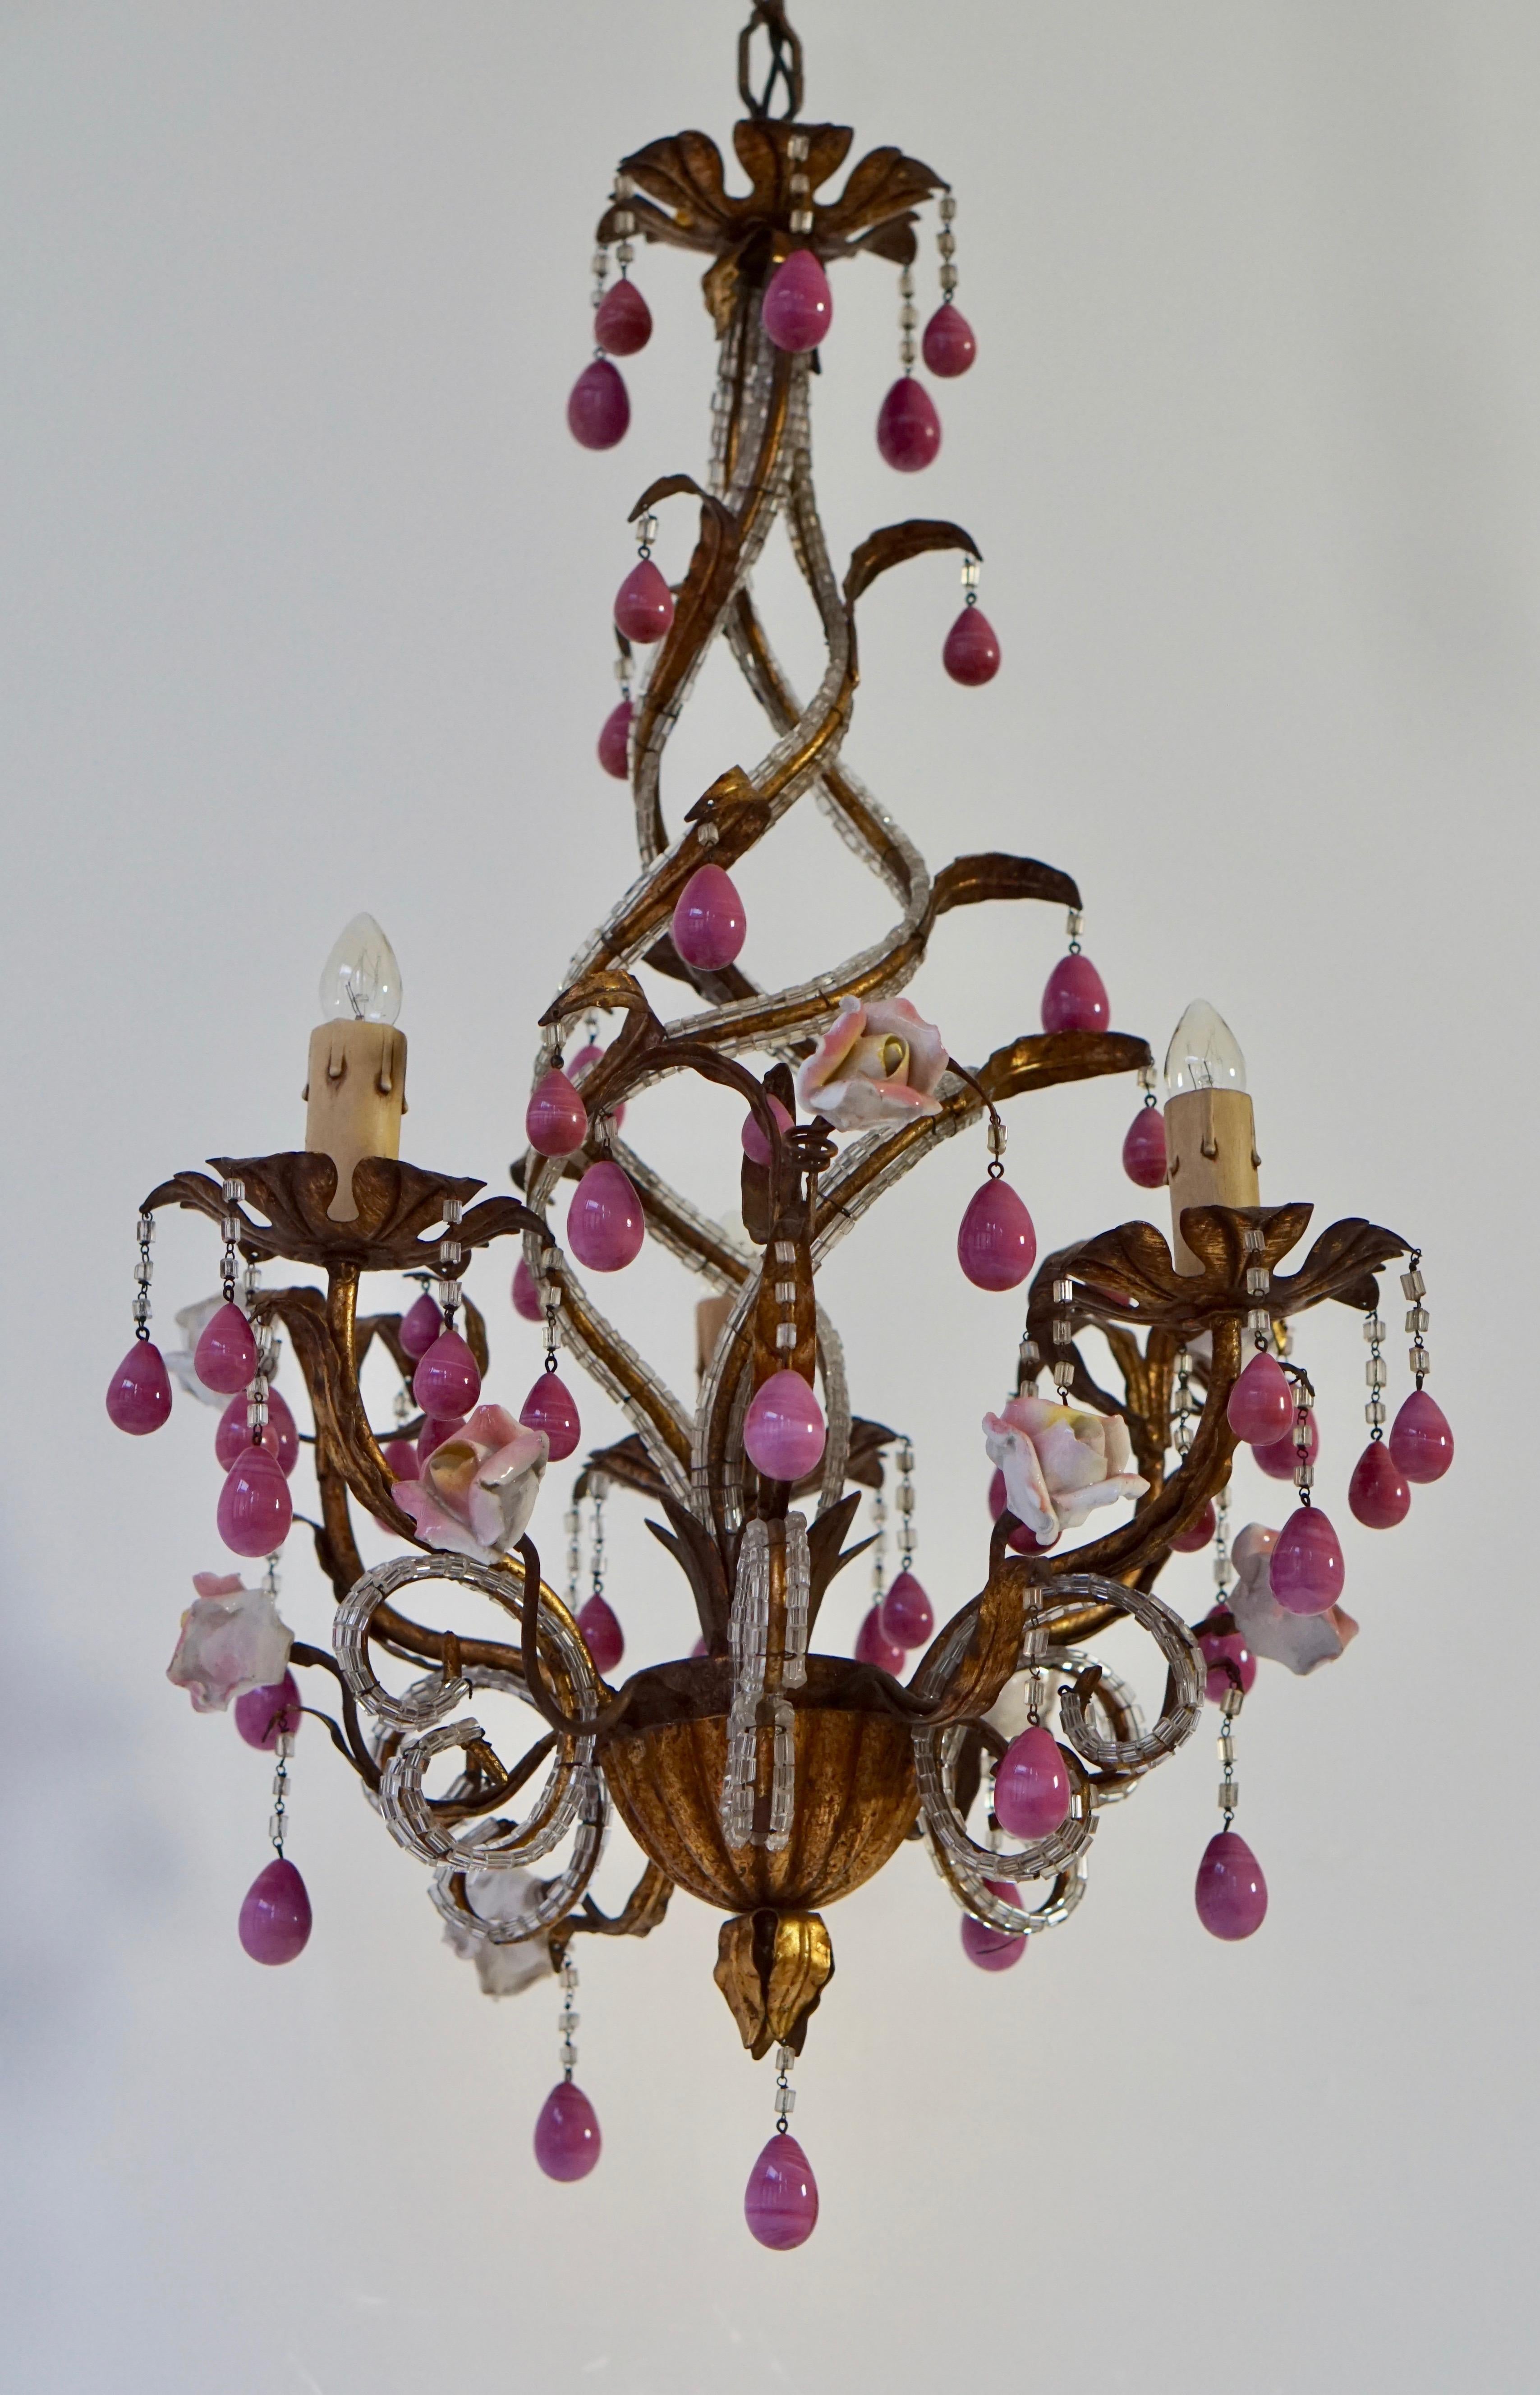 20th Century Brass and Ceramic Drop Chandelier with Porcelain Flowers, Italy For Sale